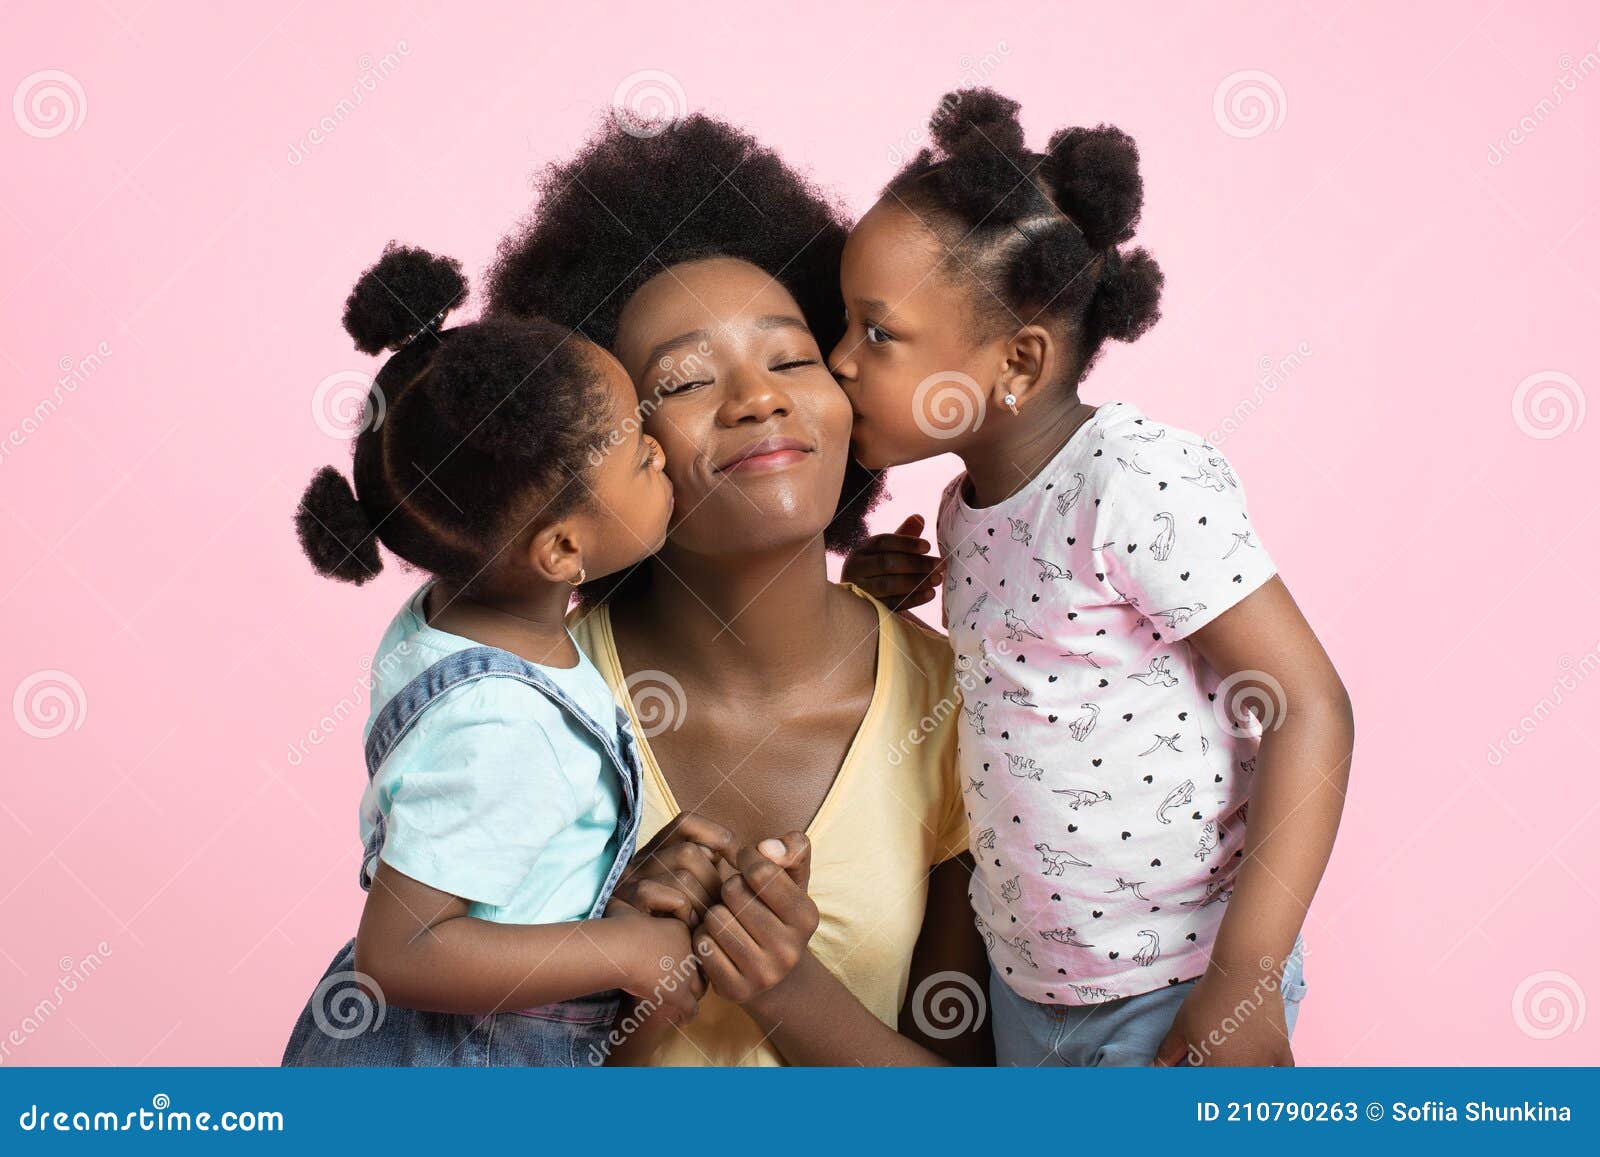 motherhood and family concept. lovely cute two little african girls kids in summer outfits, having fun and kissing their